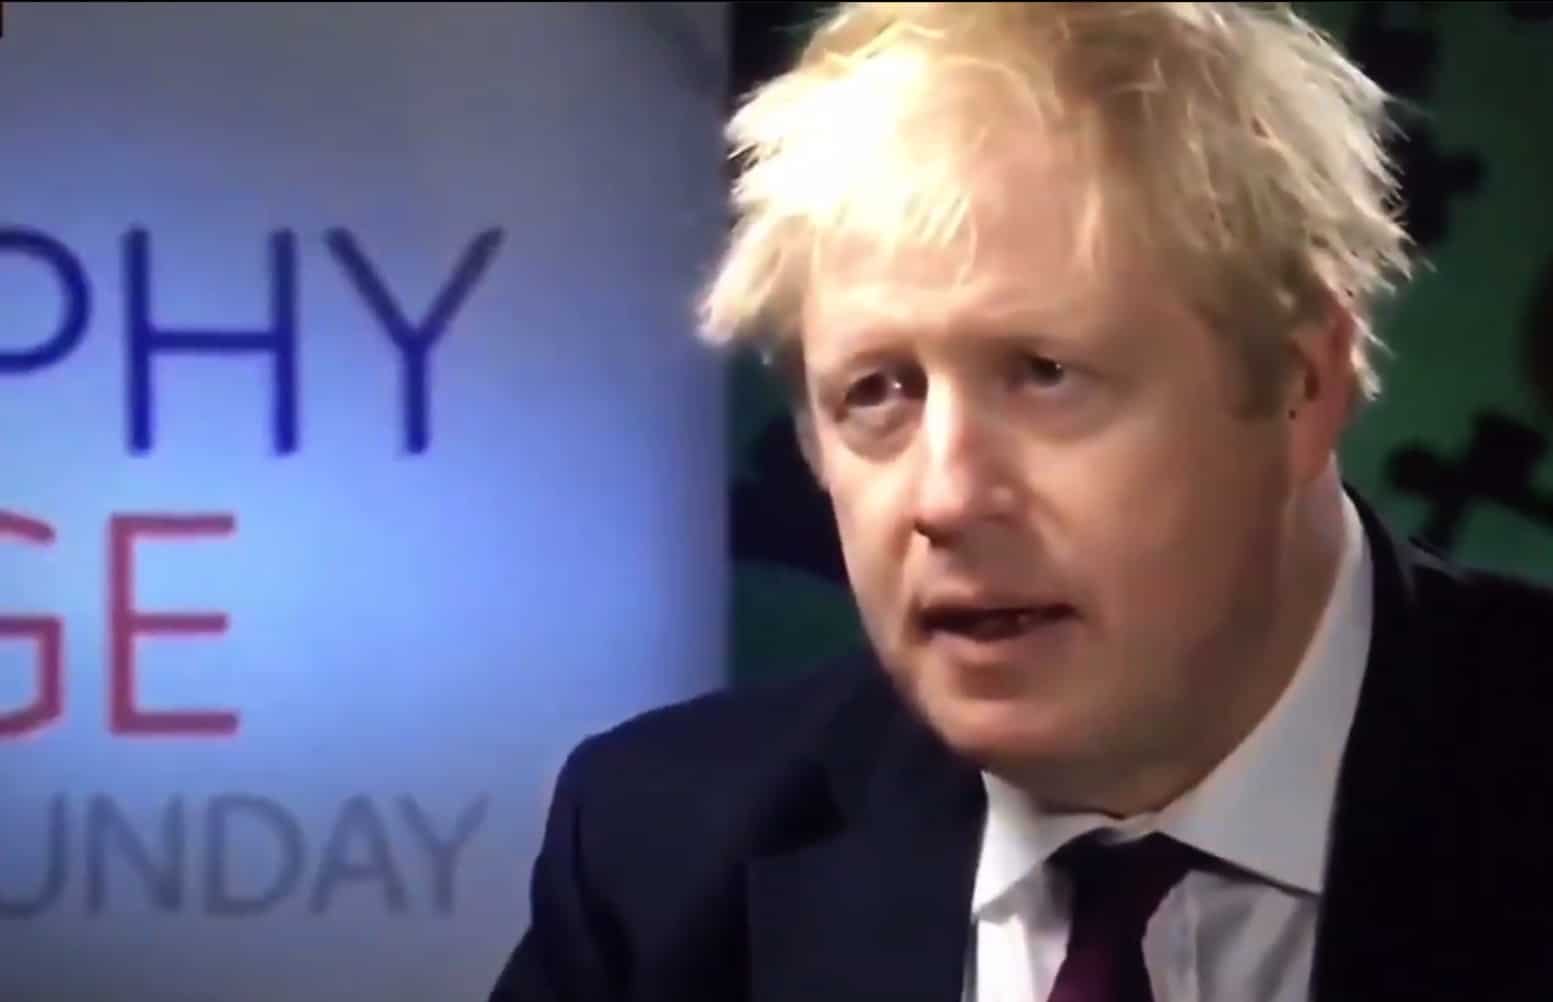 Flashback: To when Boris Johnson promised cheaper household gas bills if Brits back Brexit